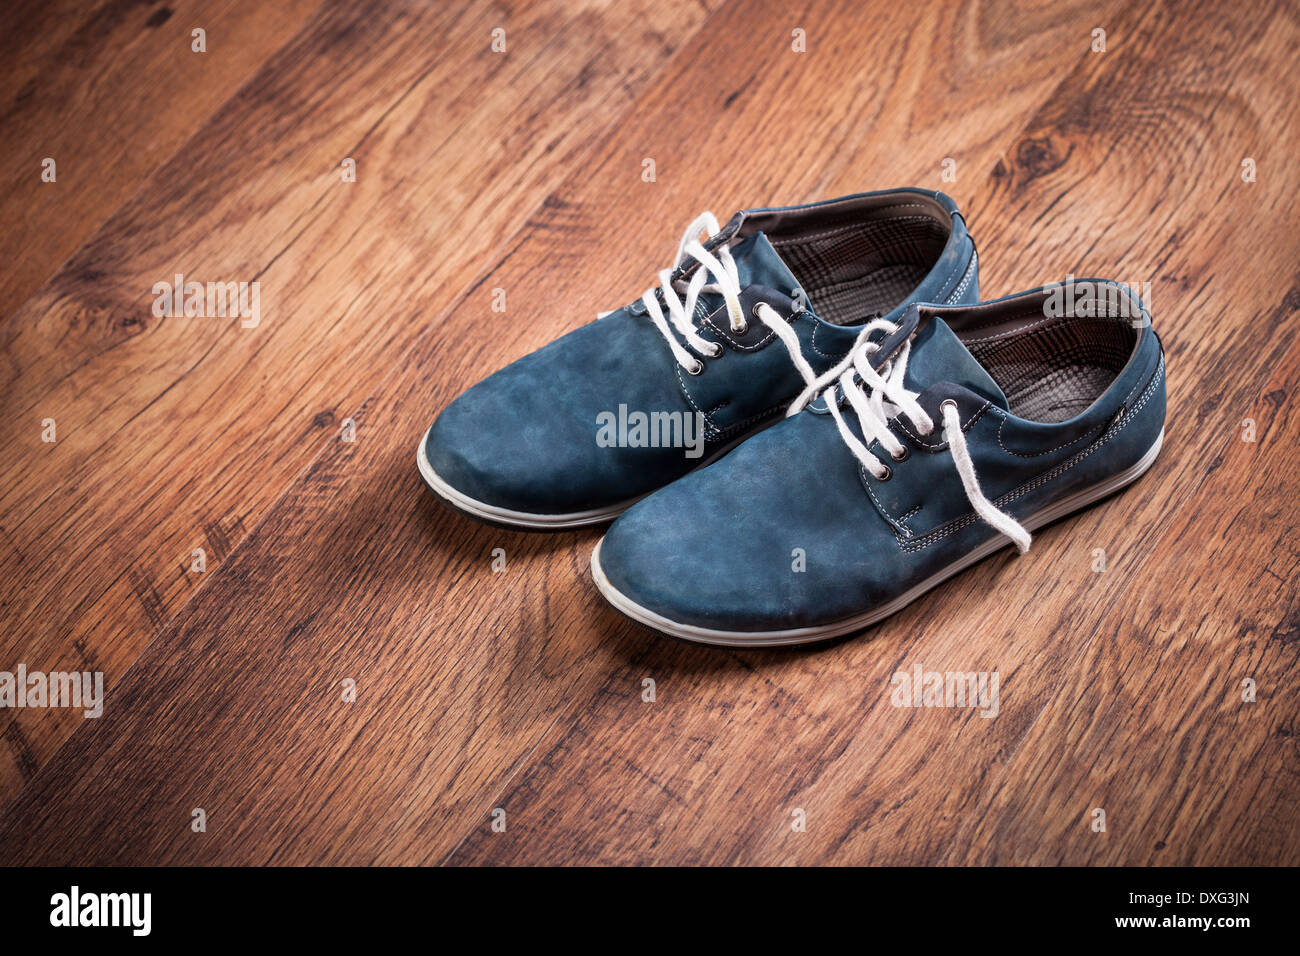 Pair of snickers on wooden floor Stock Photo